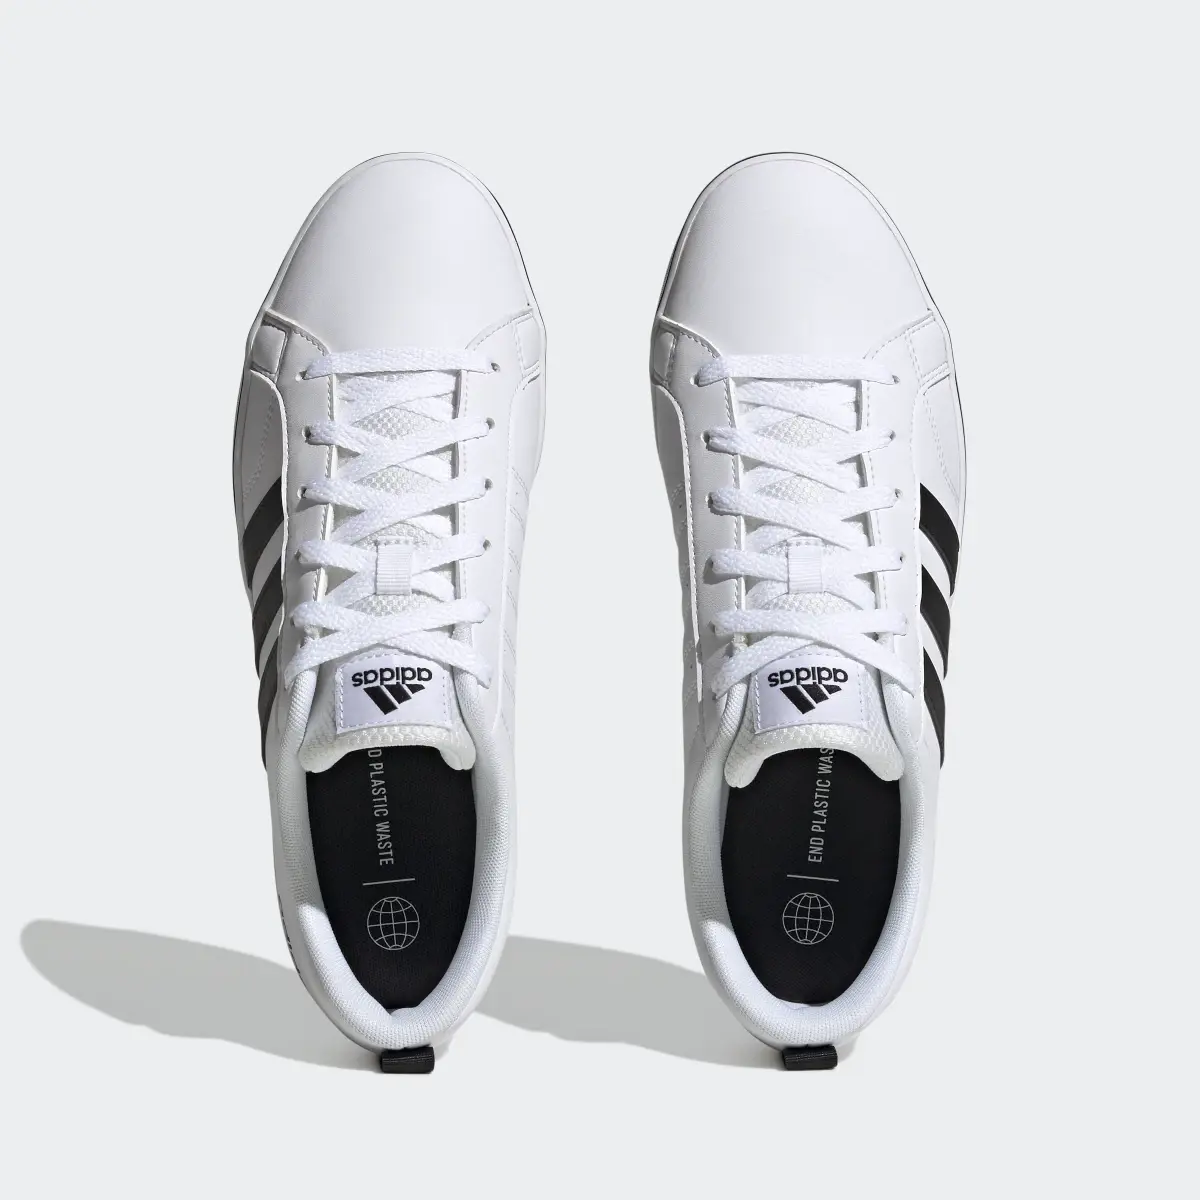 Adidas VS Pace 2.0 Schuh. 3